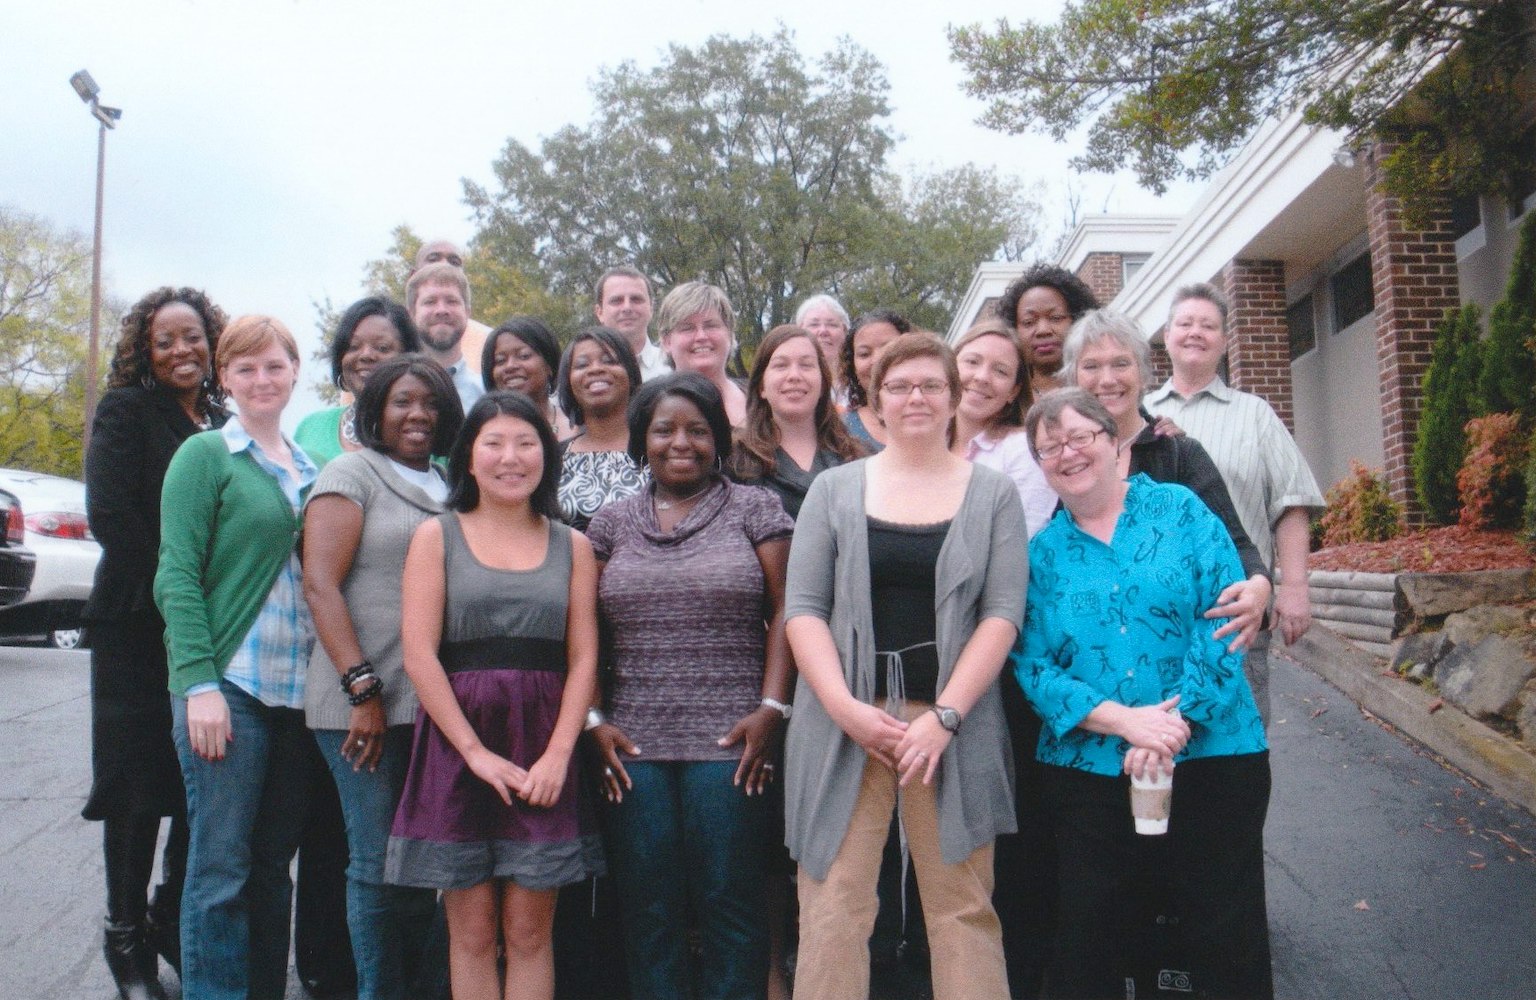 Kathie Hiers and some of the AIDS Alabama staff, 2010. Photo courtesy of Kathie Hiers.